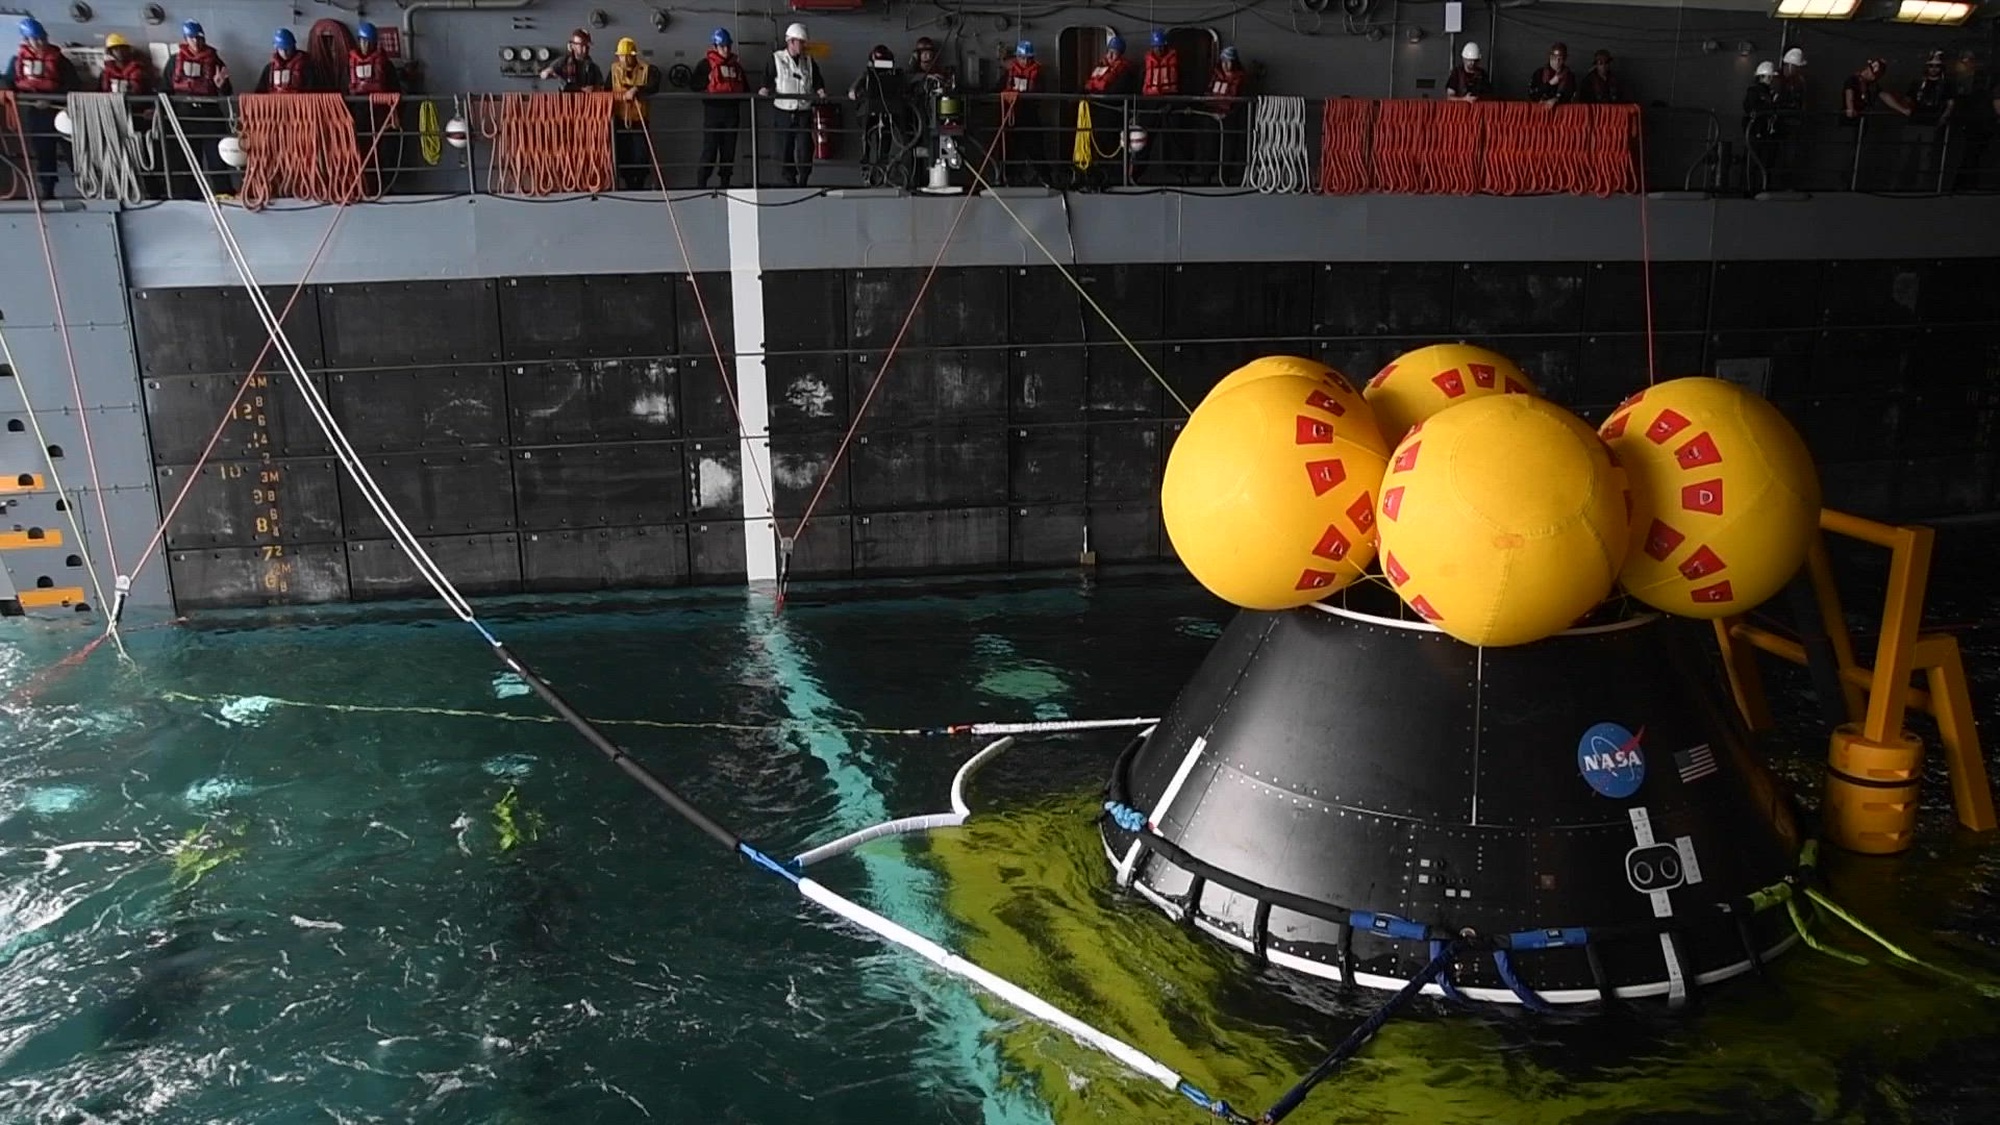 View of a space capsule with yellow spheres attached to in a ship's well deck. 